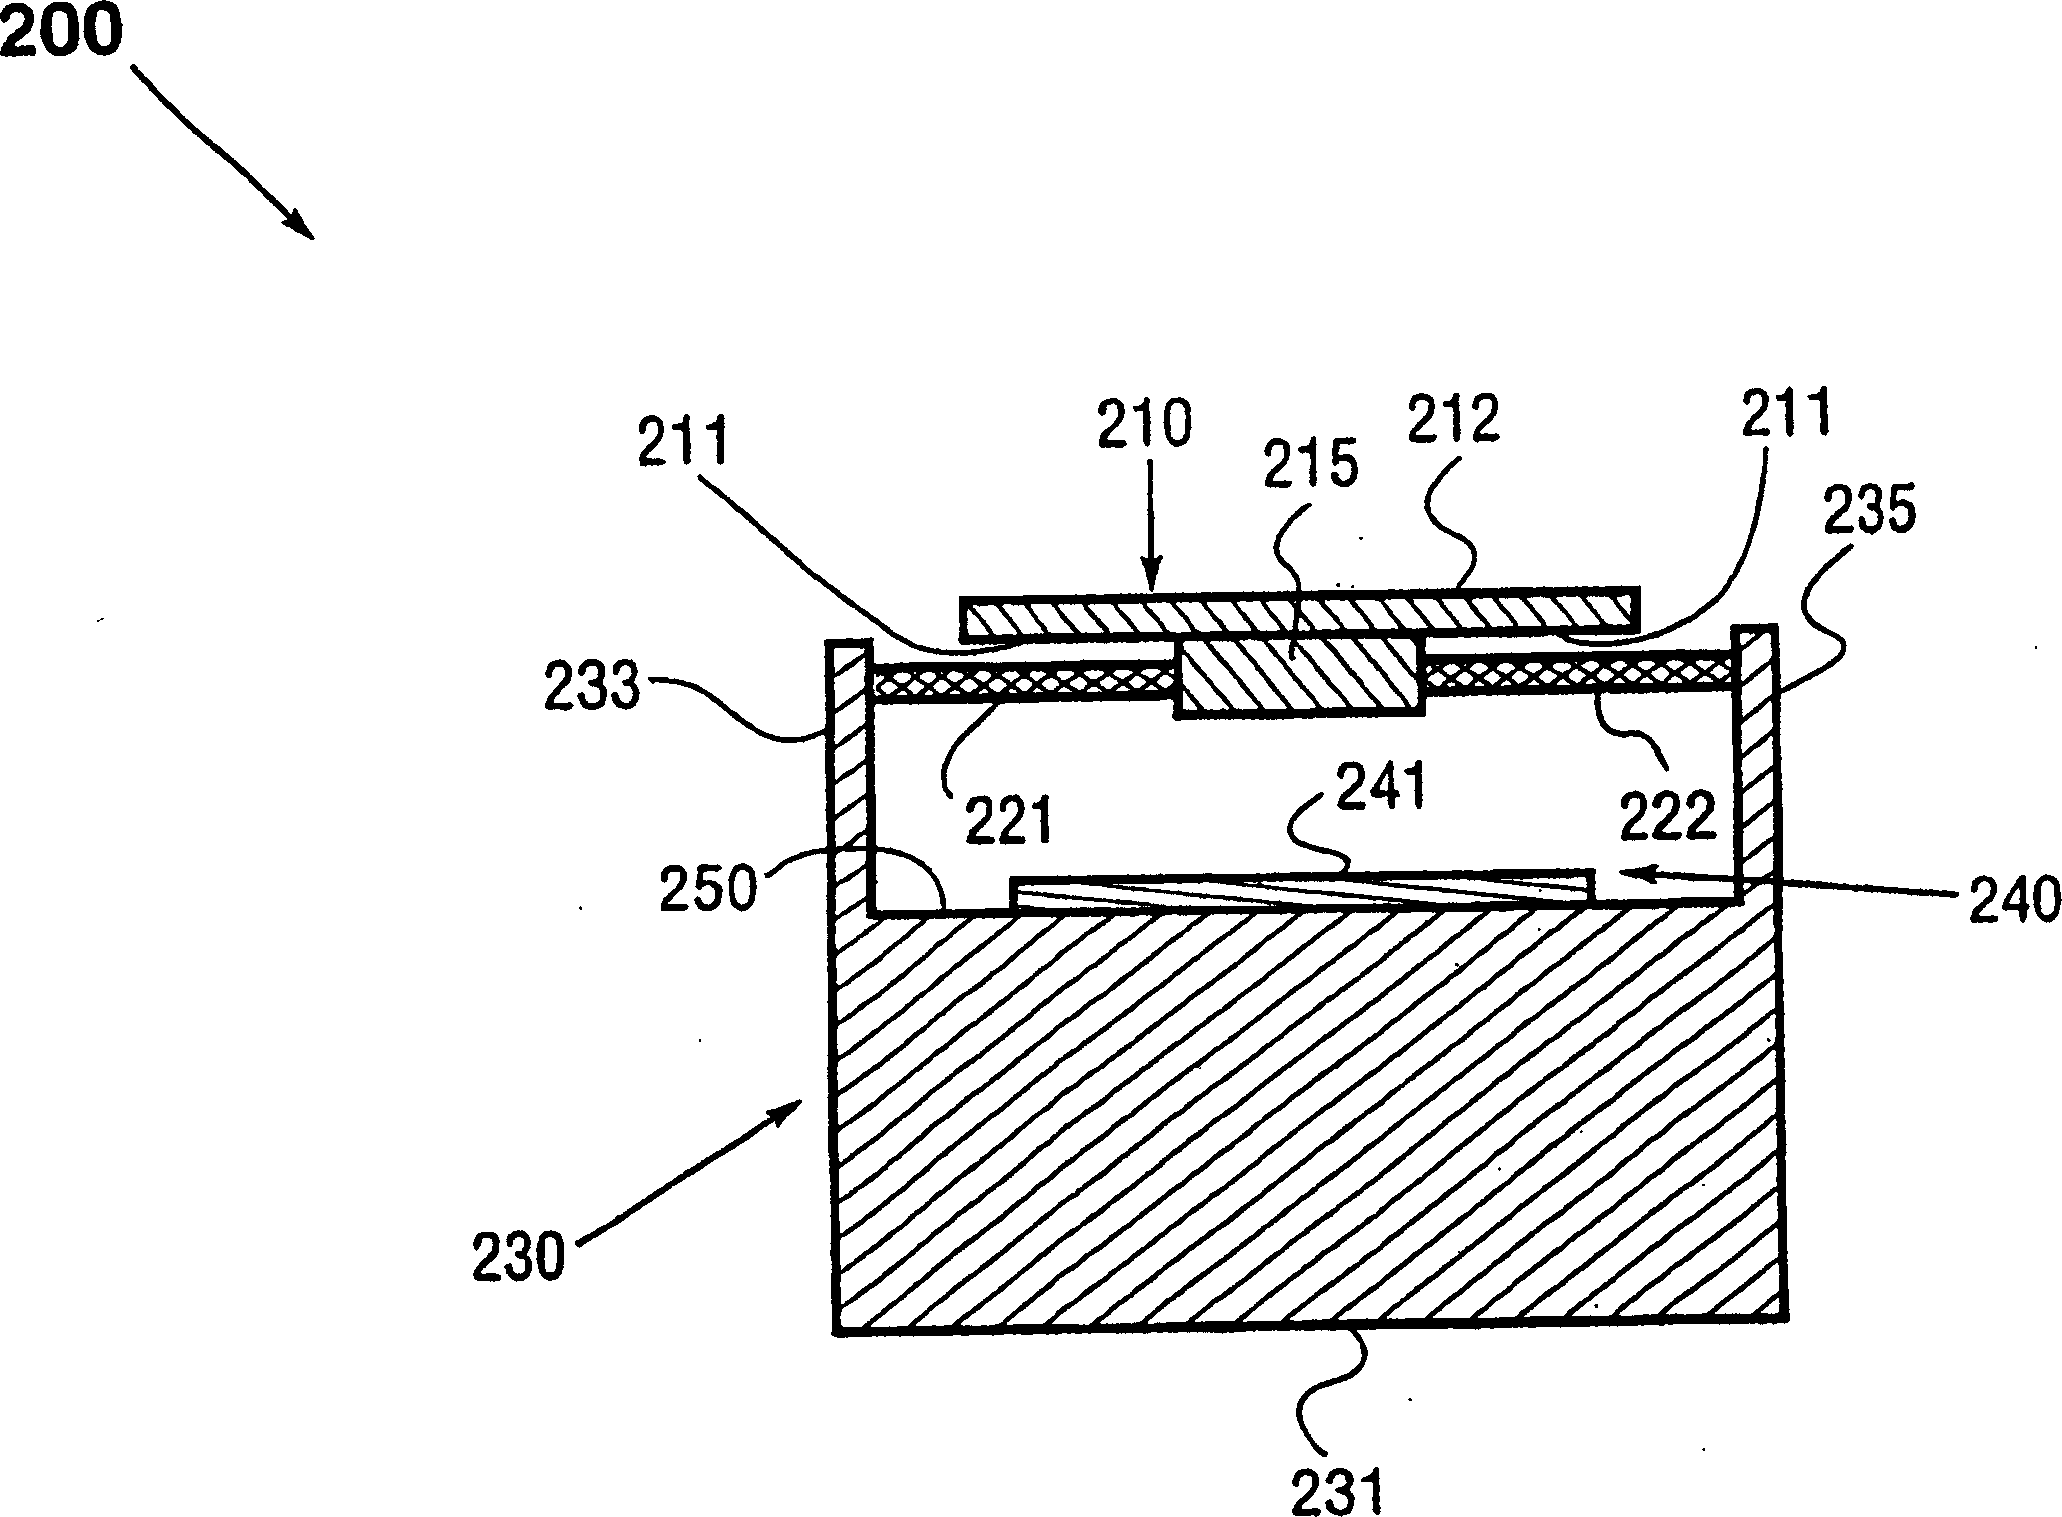 Bulk silicon mirrors with hinges underneath